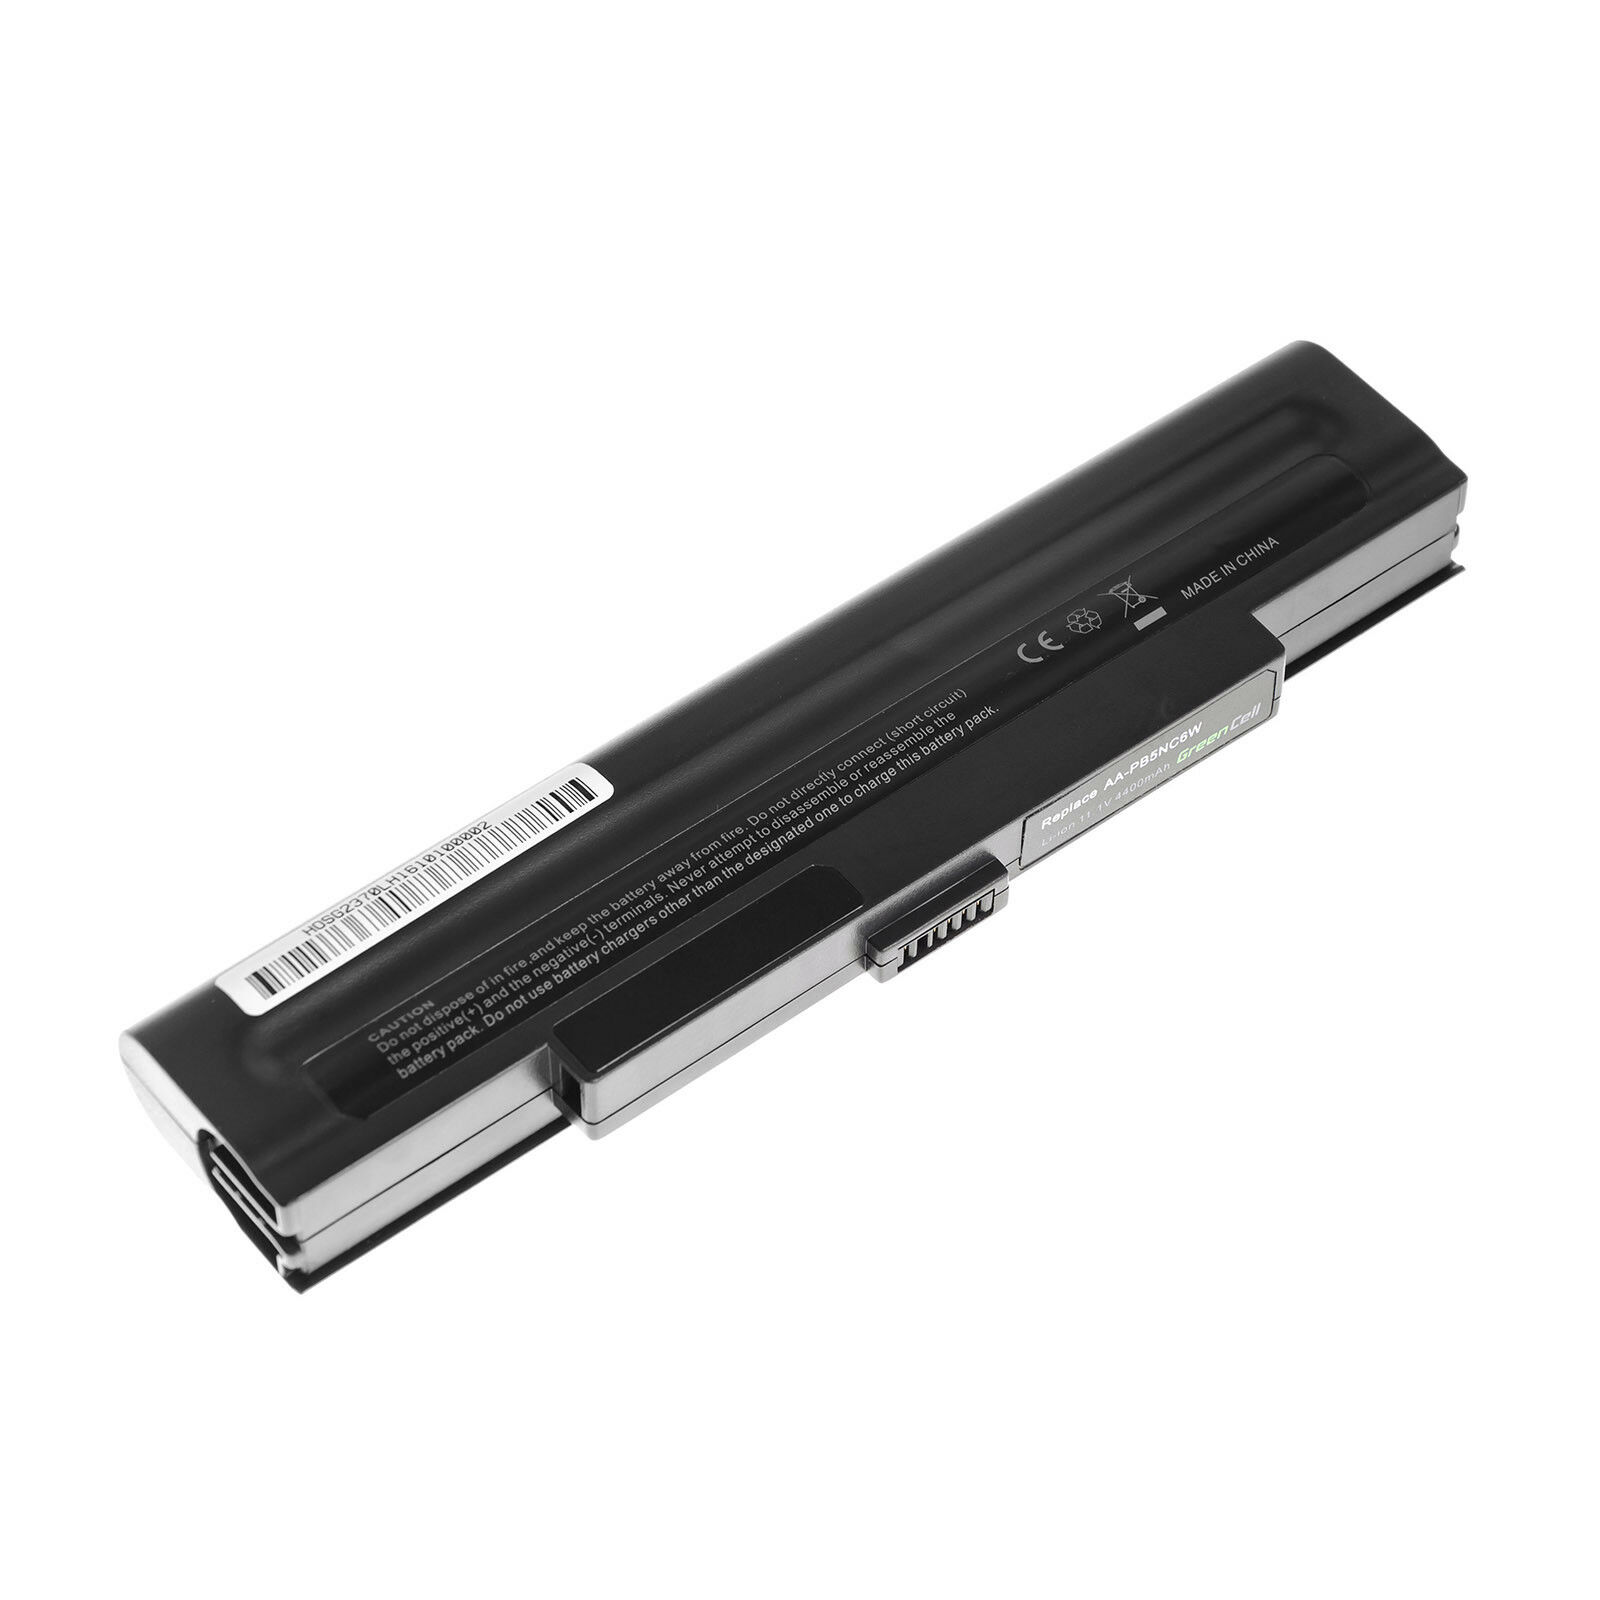 Samsung NP-Q35-T5500 Ruby Q45 Q70 AA-PB5NC6B AA-PB5NC6B/E compatible battery